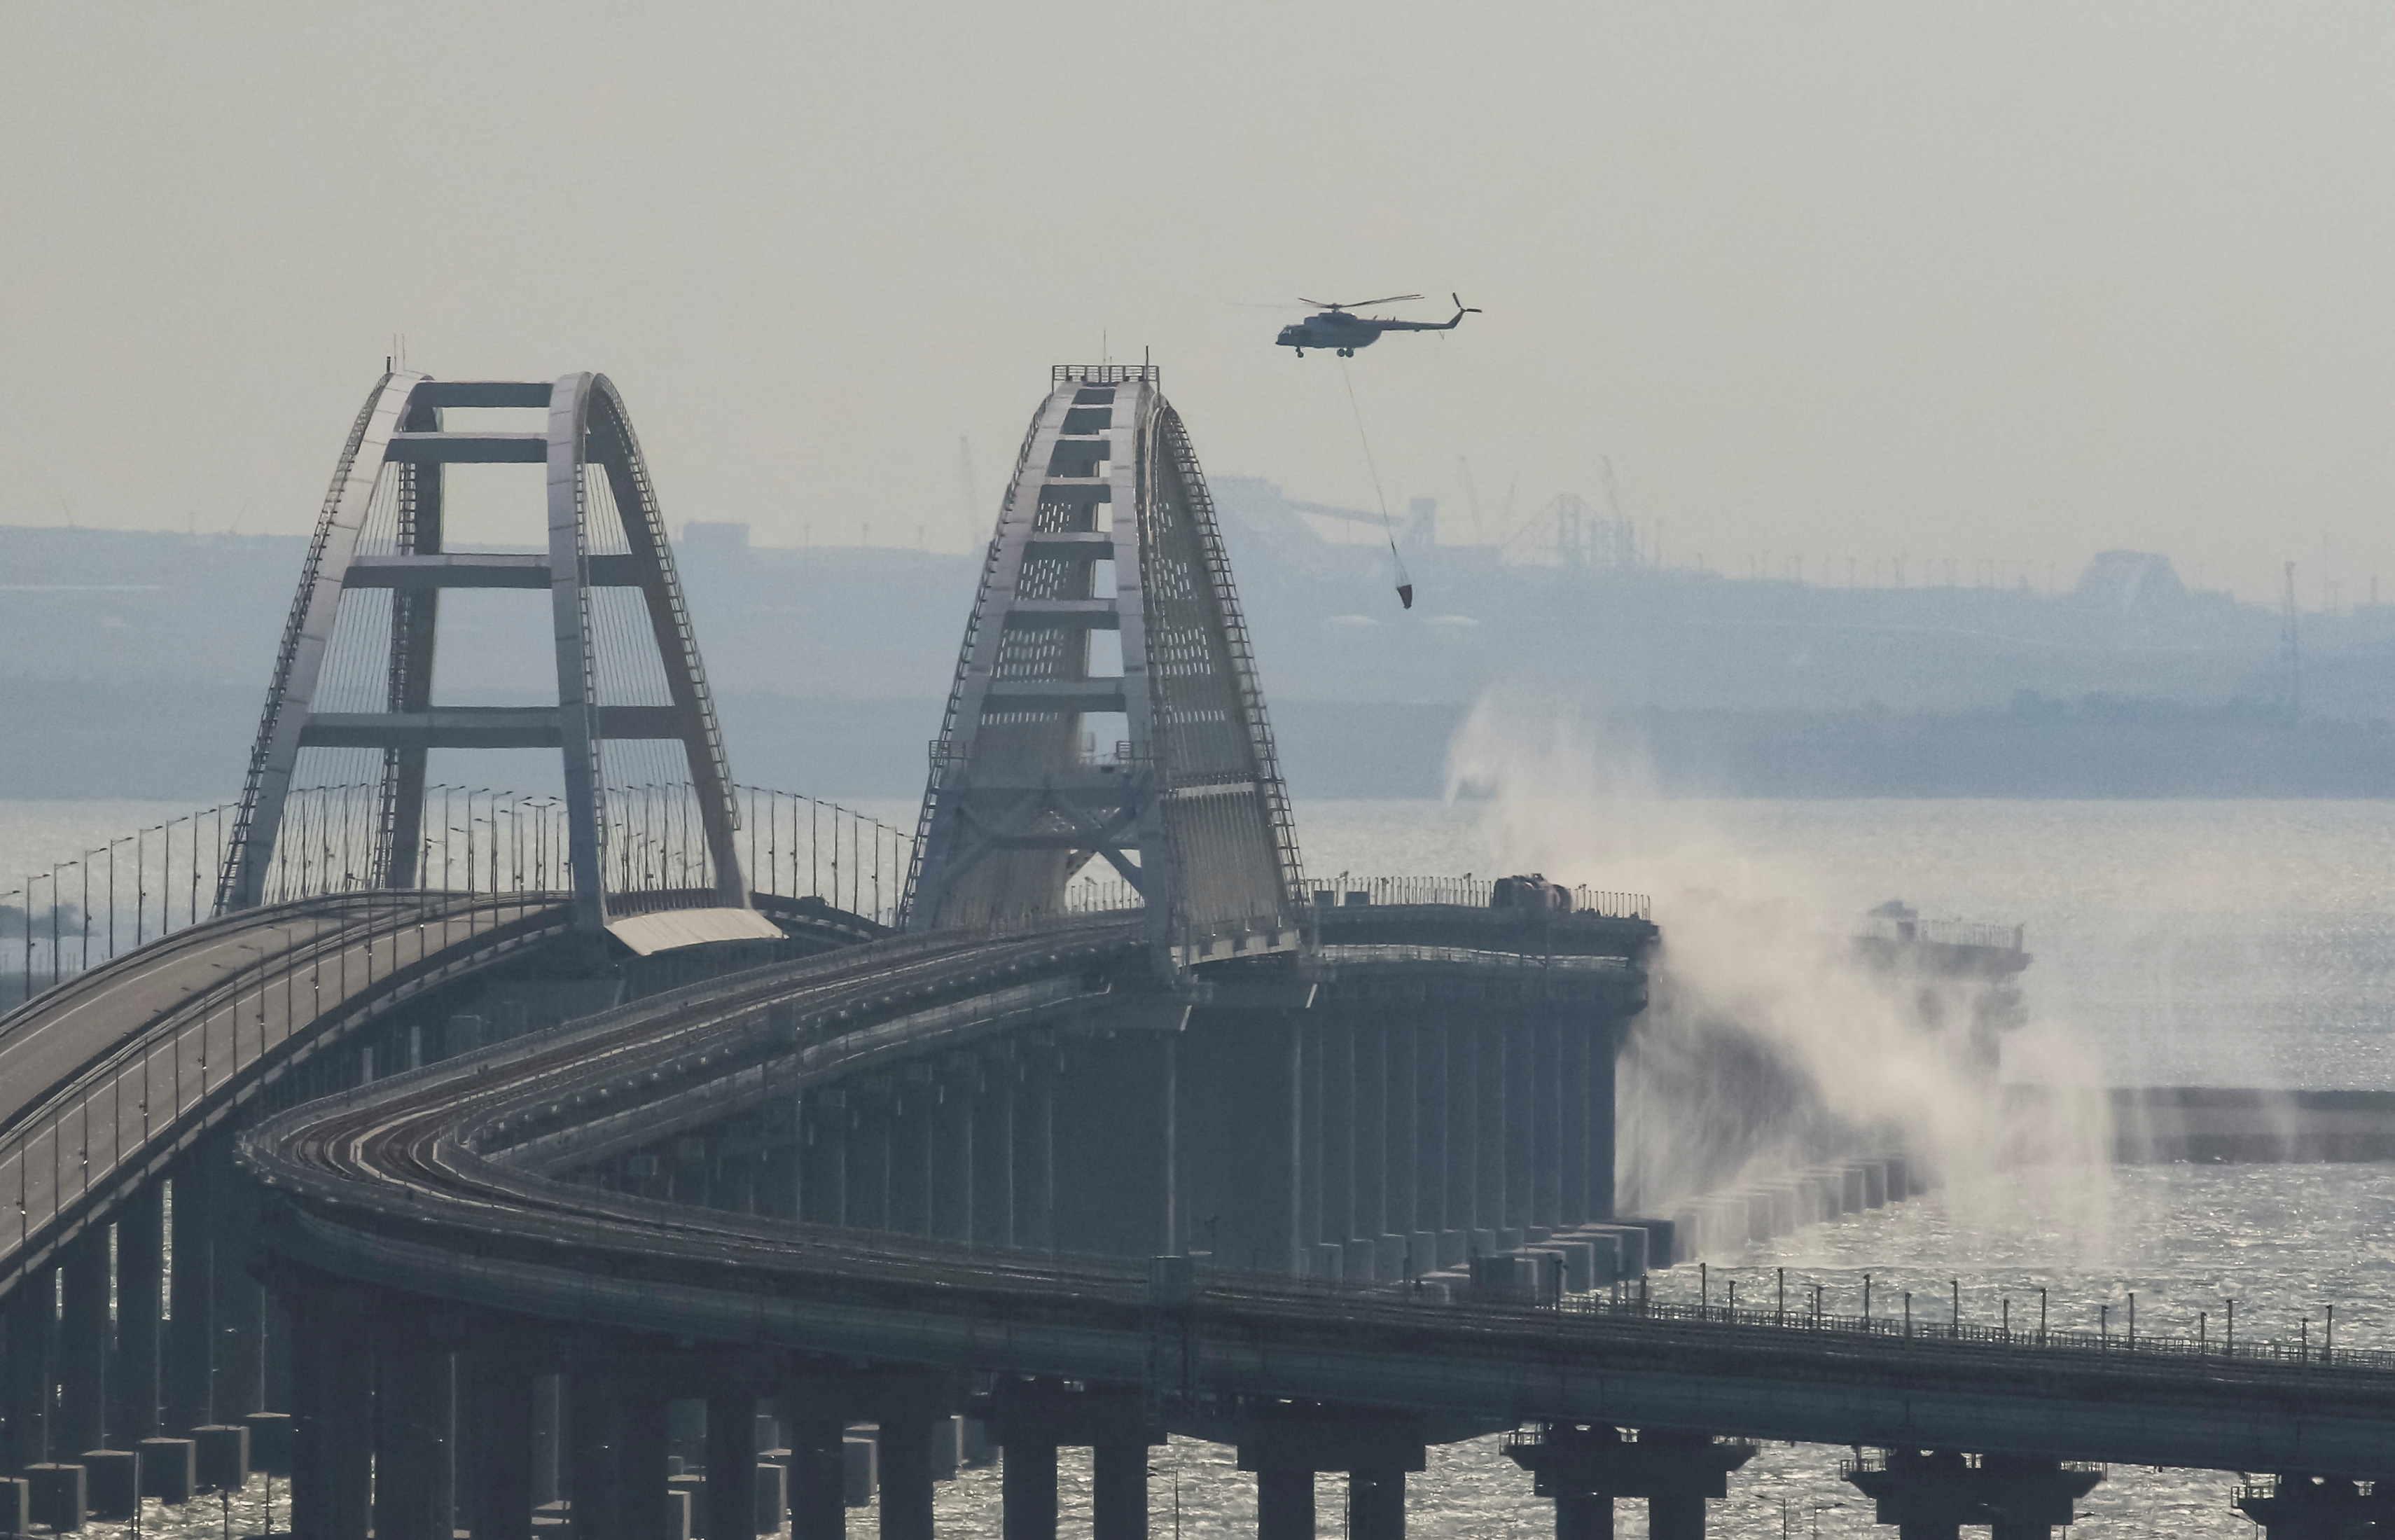 Helicopters douse the broken bridge with water to put out the flames following Ukraine's sabotage attack - one they are likely looking to replicate on a bigger scale